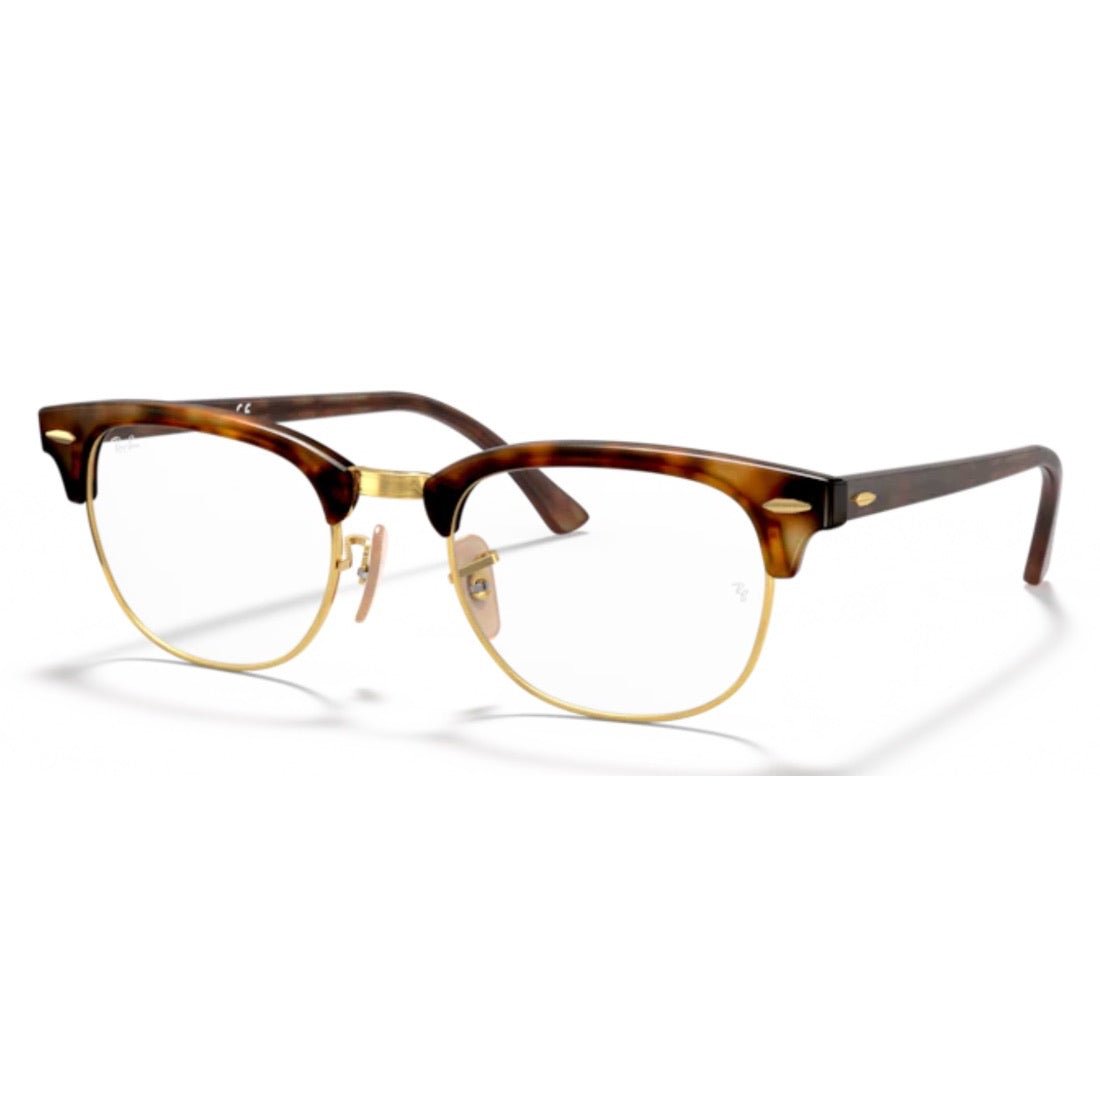 RAY-BAN - RX5154 2372 - Clubmaster - PARIS LUNETIER